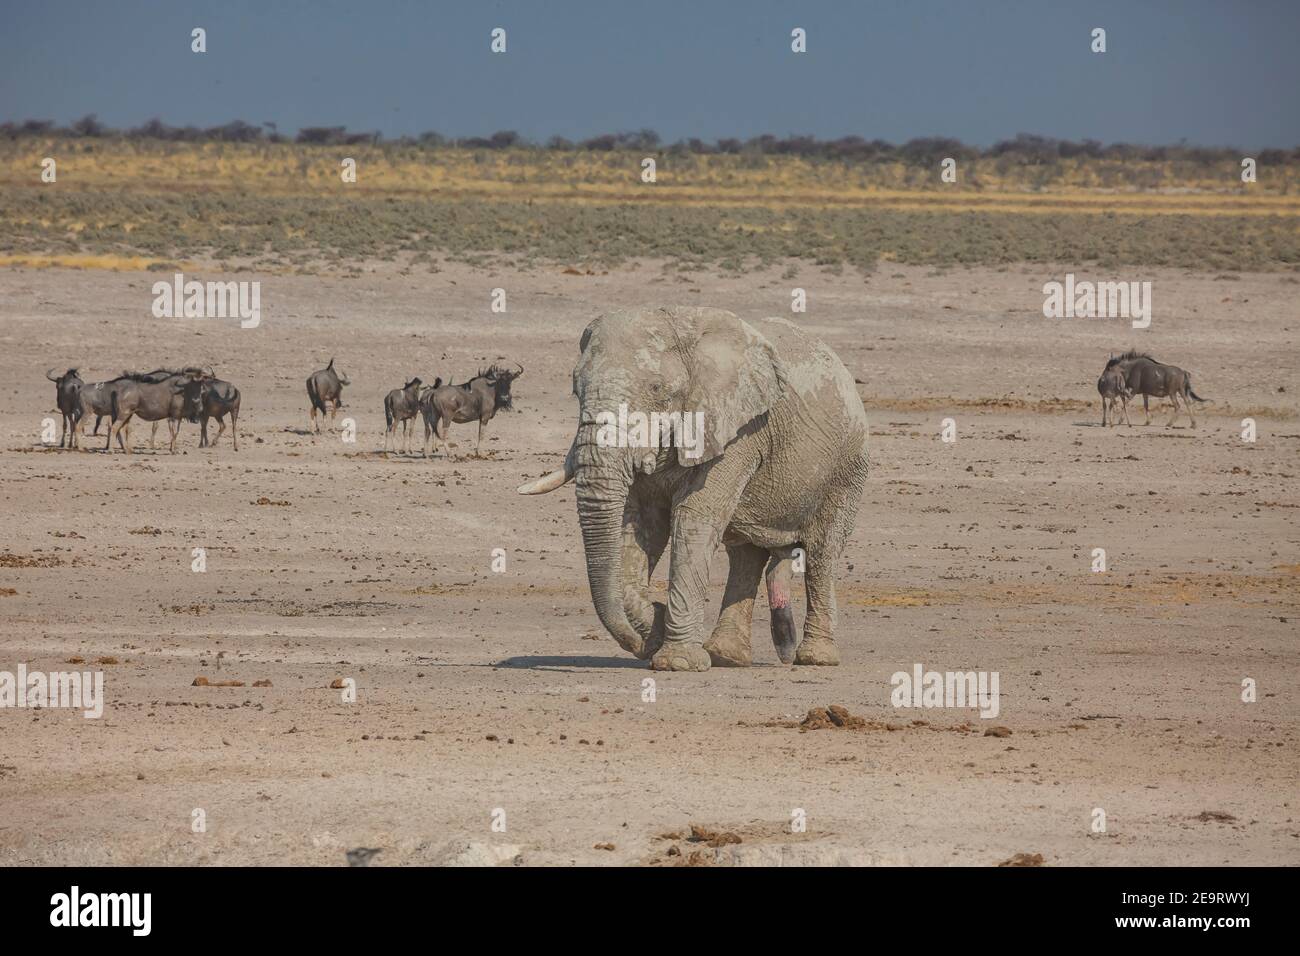 Elephant coming to the waterhole for drinking water in Etosha national Park, Namibia Stock Photo